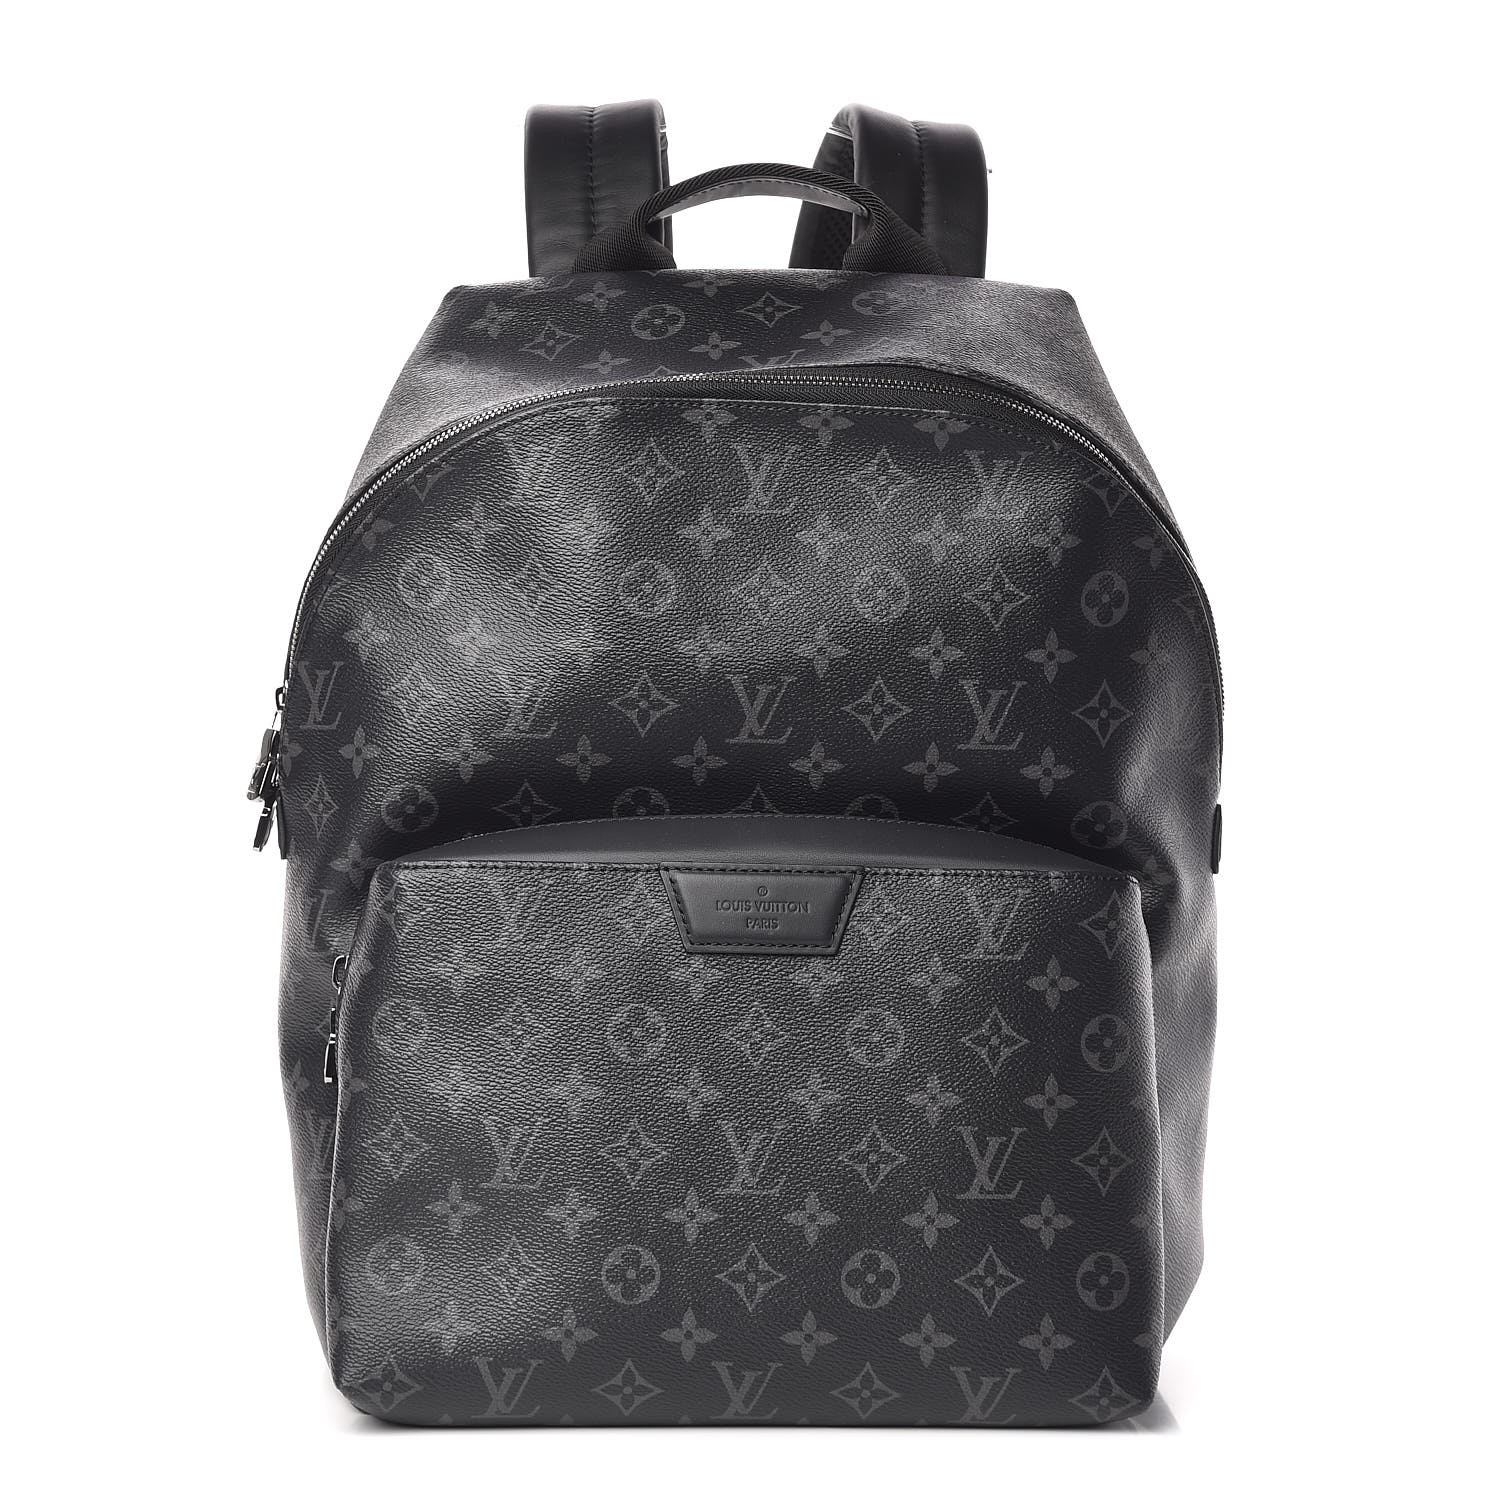 LOUIS VUITTON Monogram Eclipse Discovery Backpack PM 491342 | FASHIONPHILE